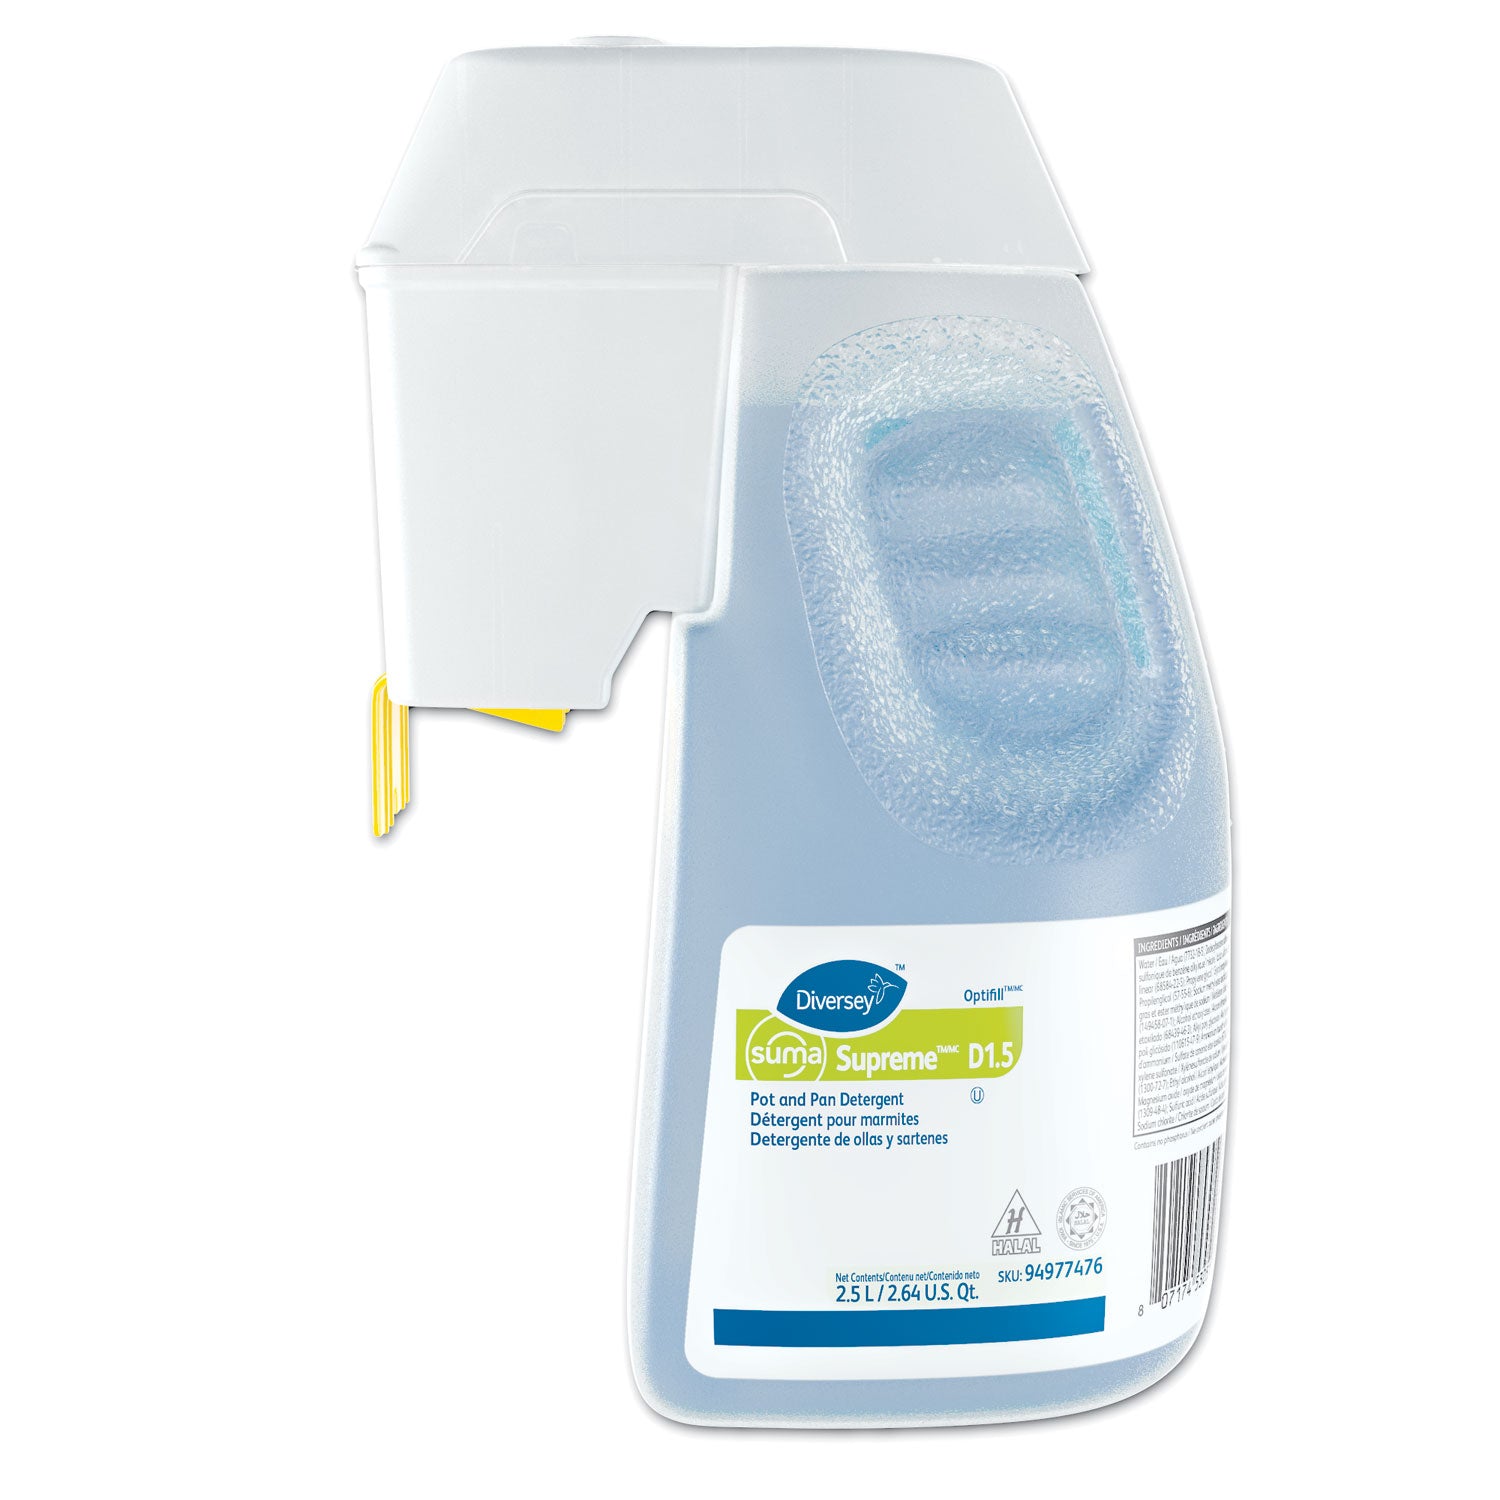 supreme-concentrated-pot-and-pan-detergent-floral-26-qt-optifill-system-refill_dvo94977476 - 1